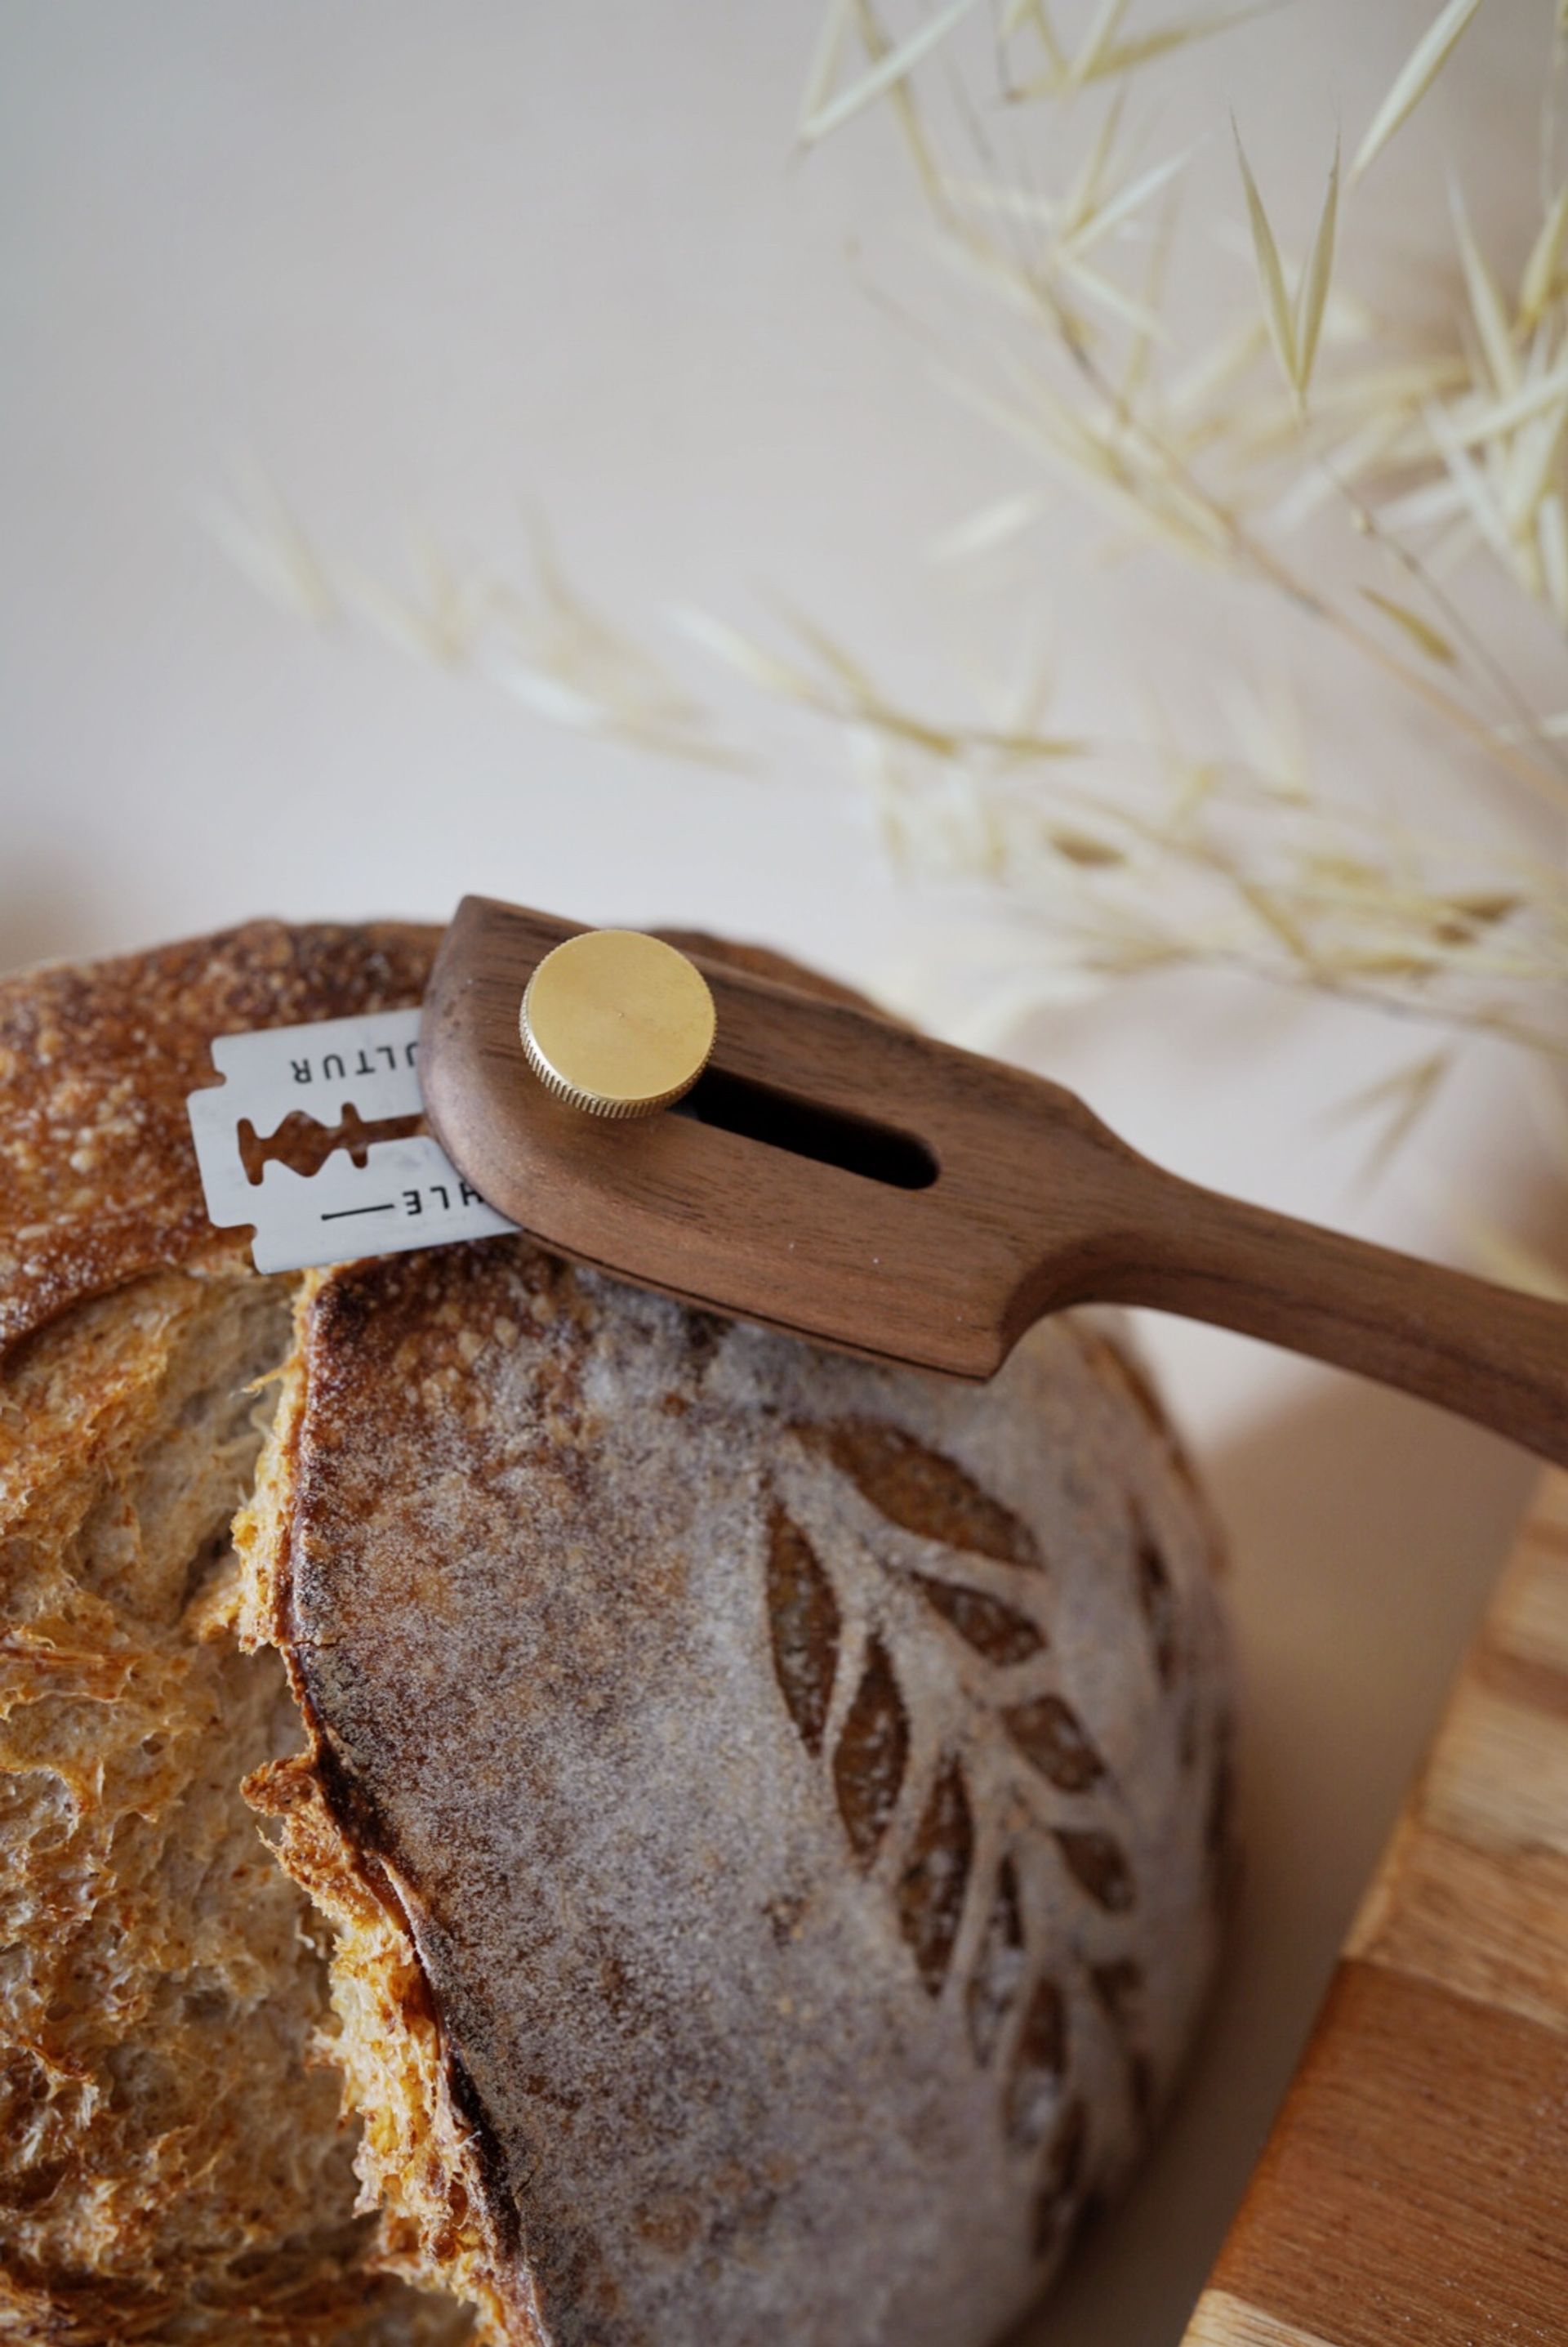 Protoiya Bread Lame,Handcrafted Bread Scoring Knife Lame with 5 Replaceable Blades,Homemade Pizza,Cake or Bread Lame Cutter Dough Scoring Tool, Size